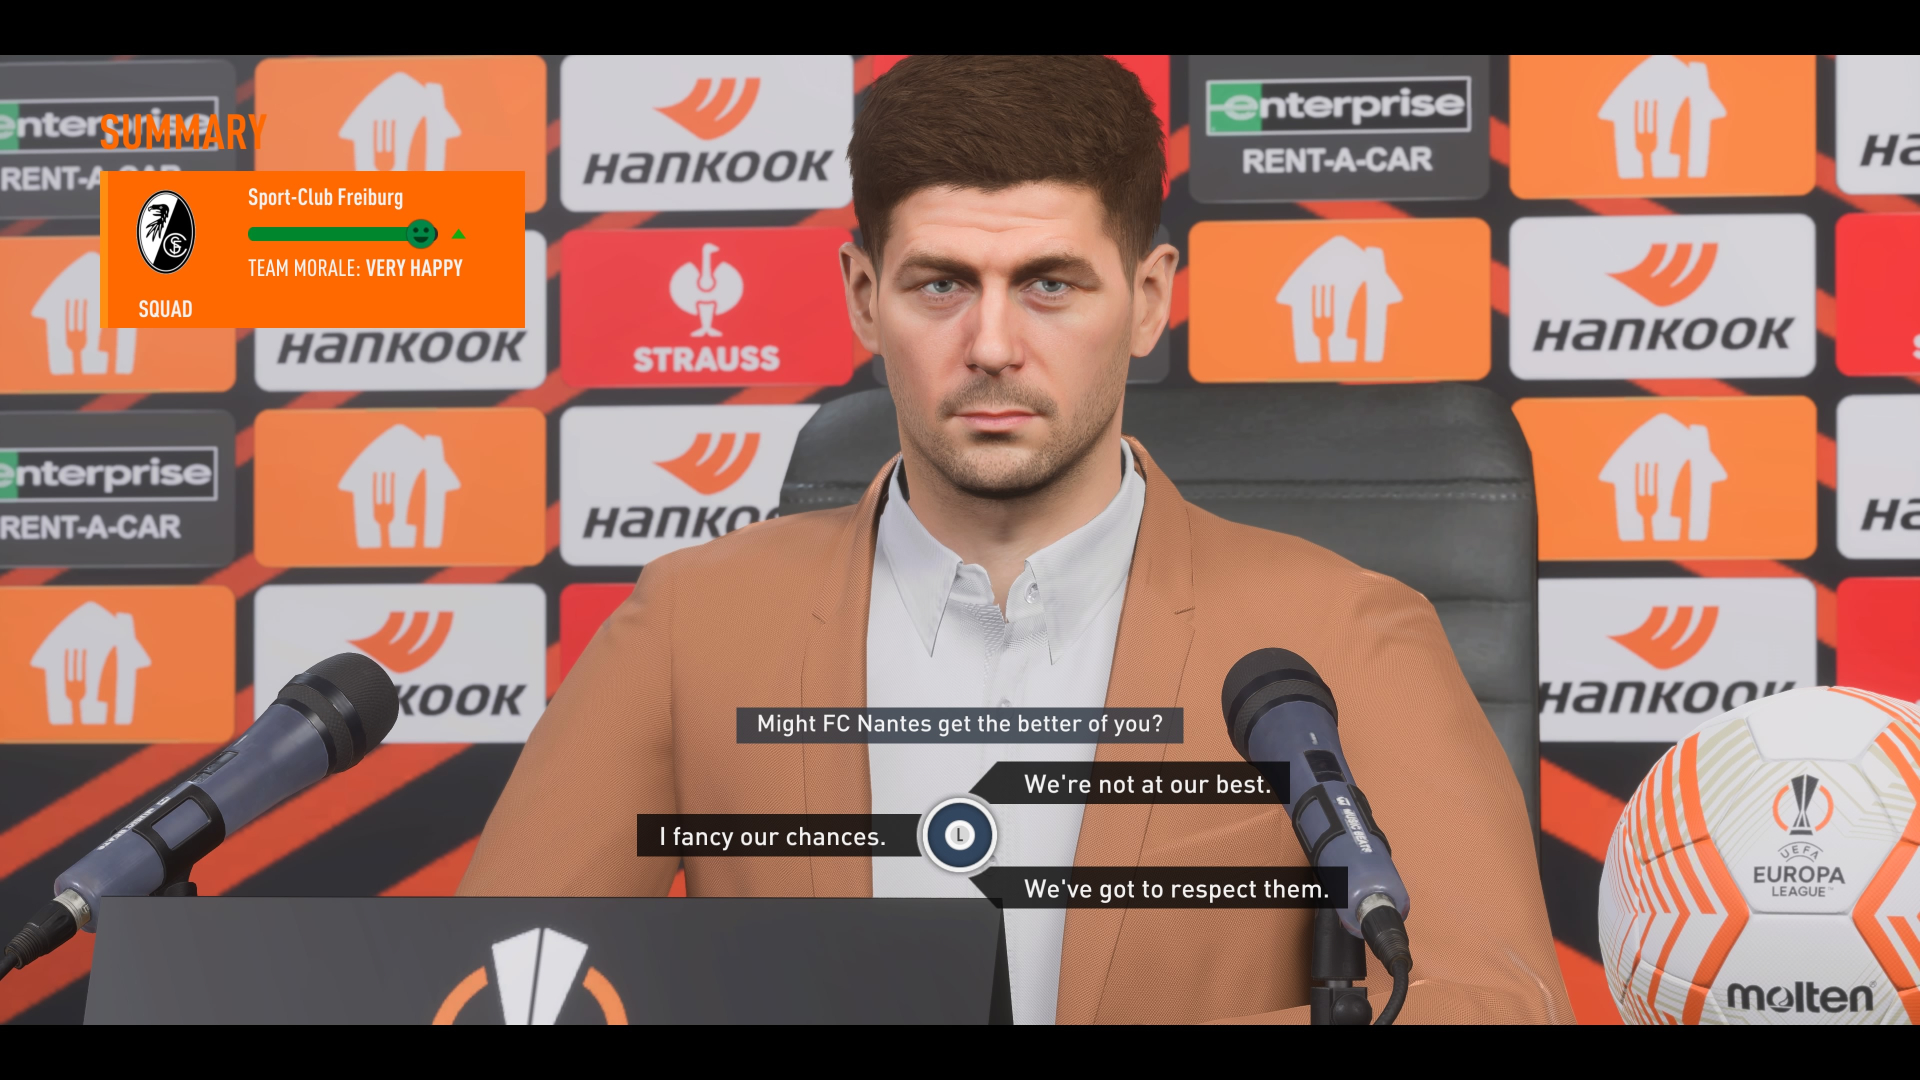 Best centre backs FIFA 23: Career Mode signings for every budget